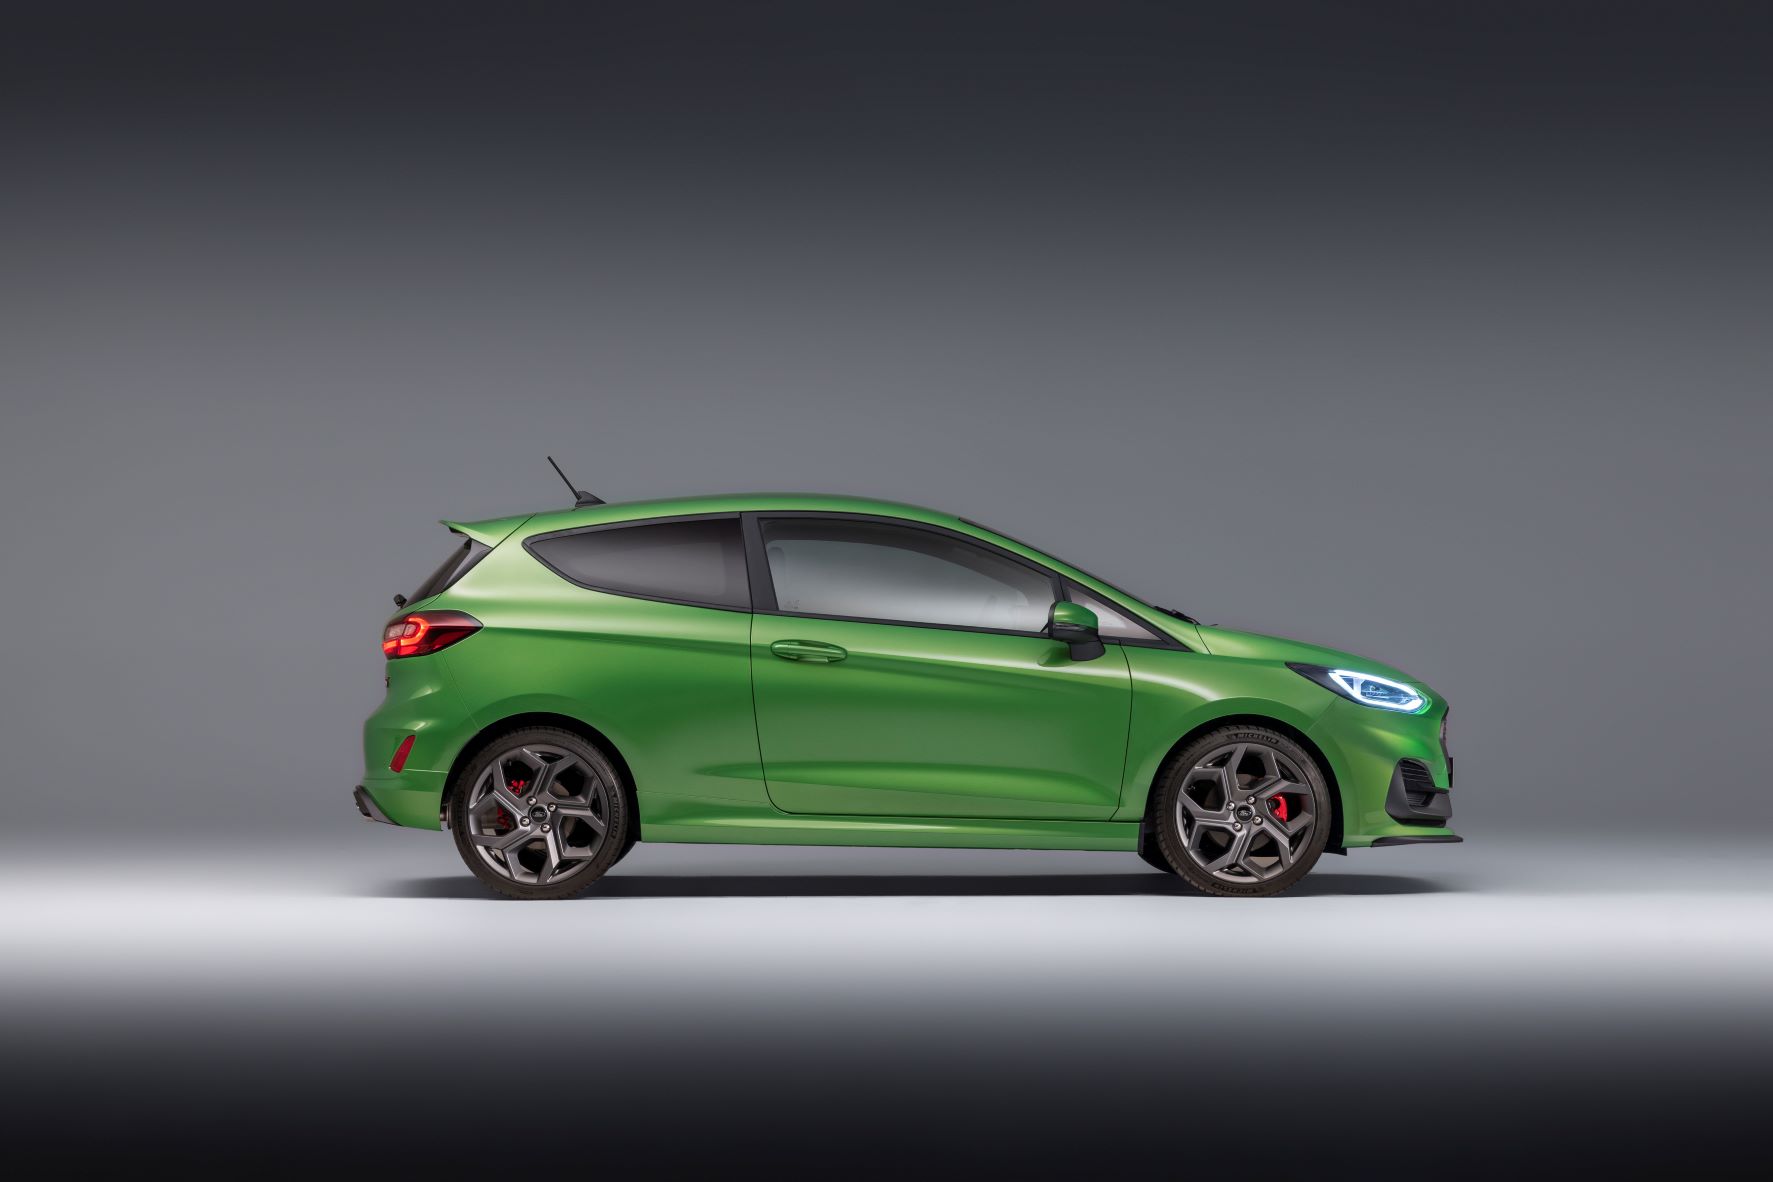 Side view of the new Ford Fiesta ST